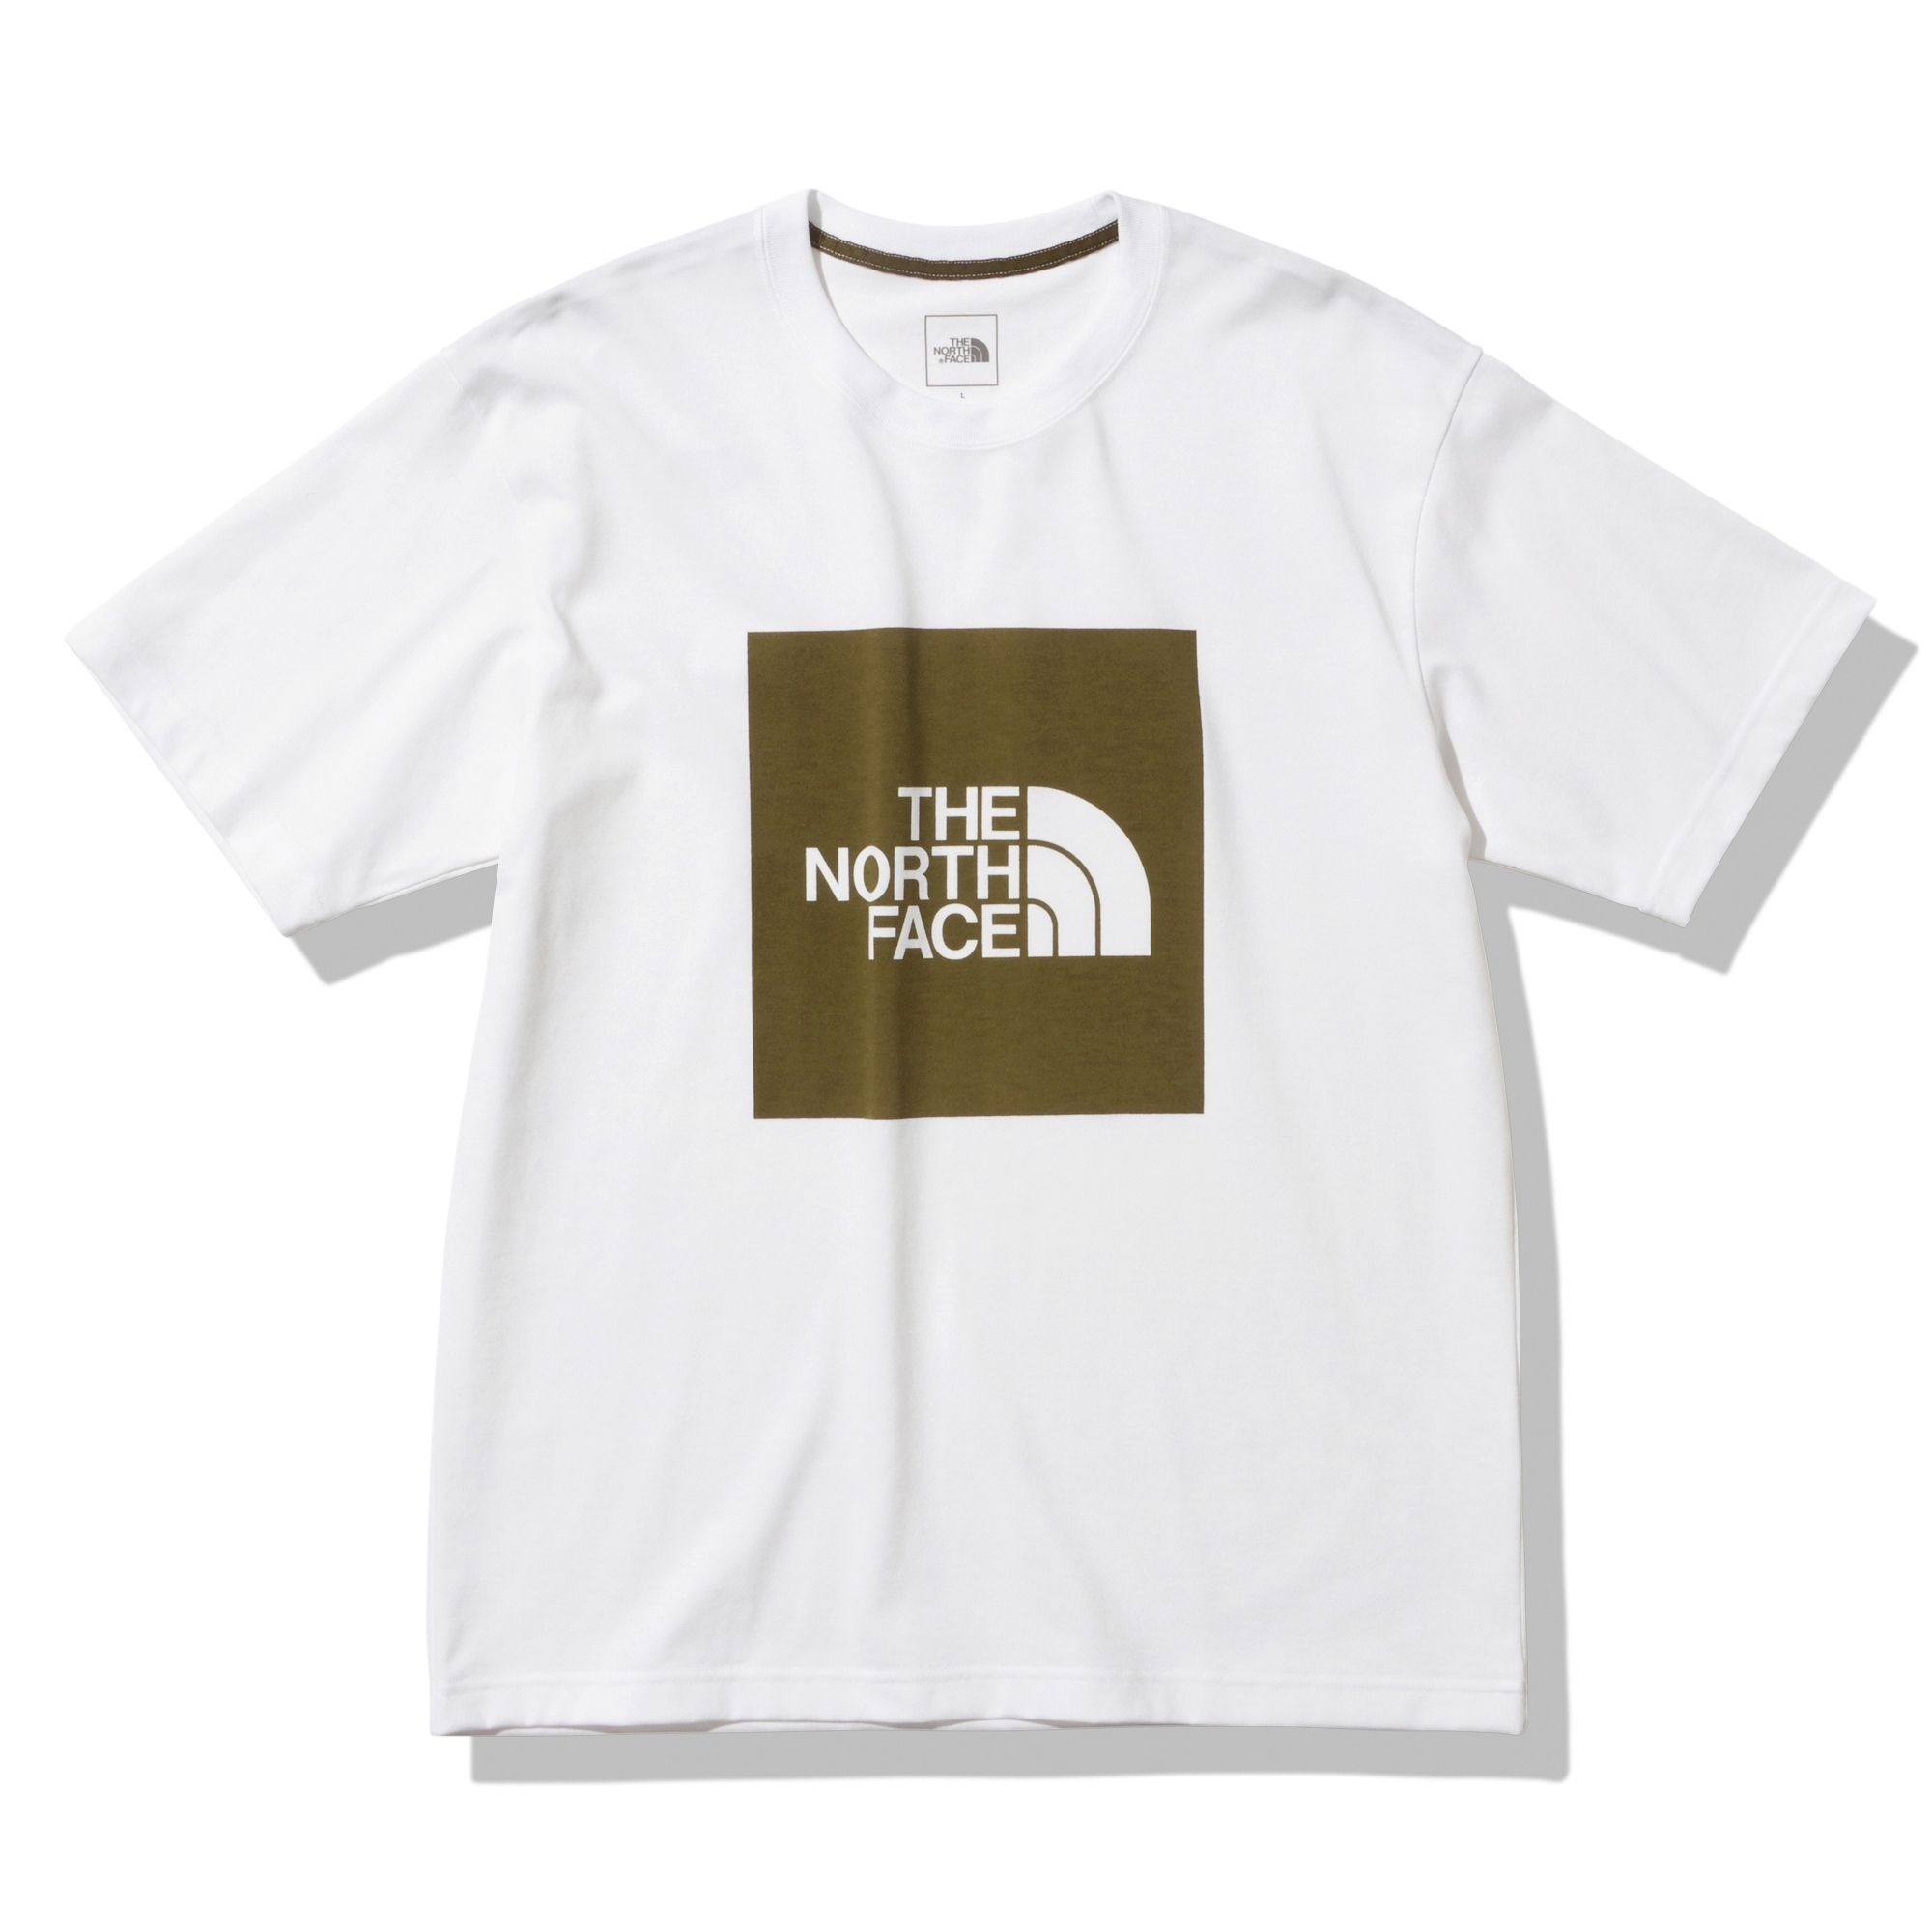 NT32351 日本THE NORTH FACE S/S COLORED SQUARE LOGO 